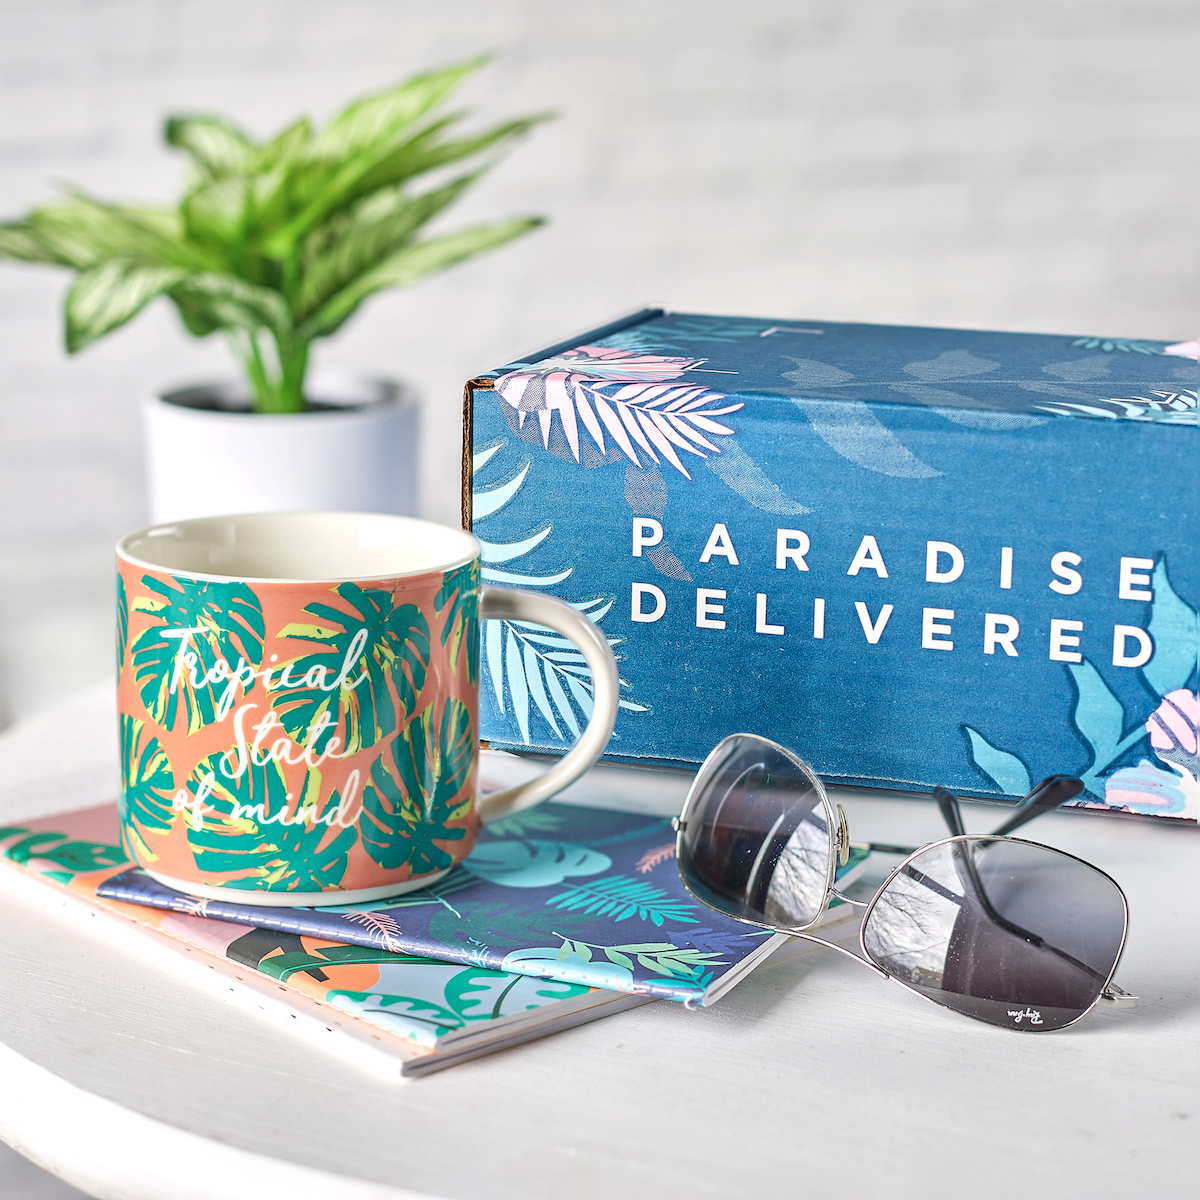 Paradise Delivered Deal Get 40 Off First Box! hello subscription